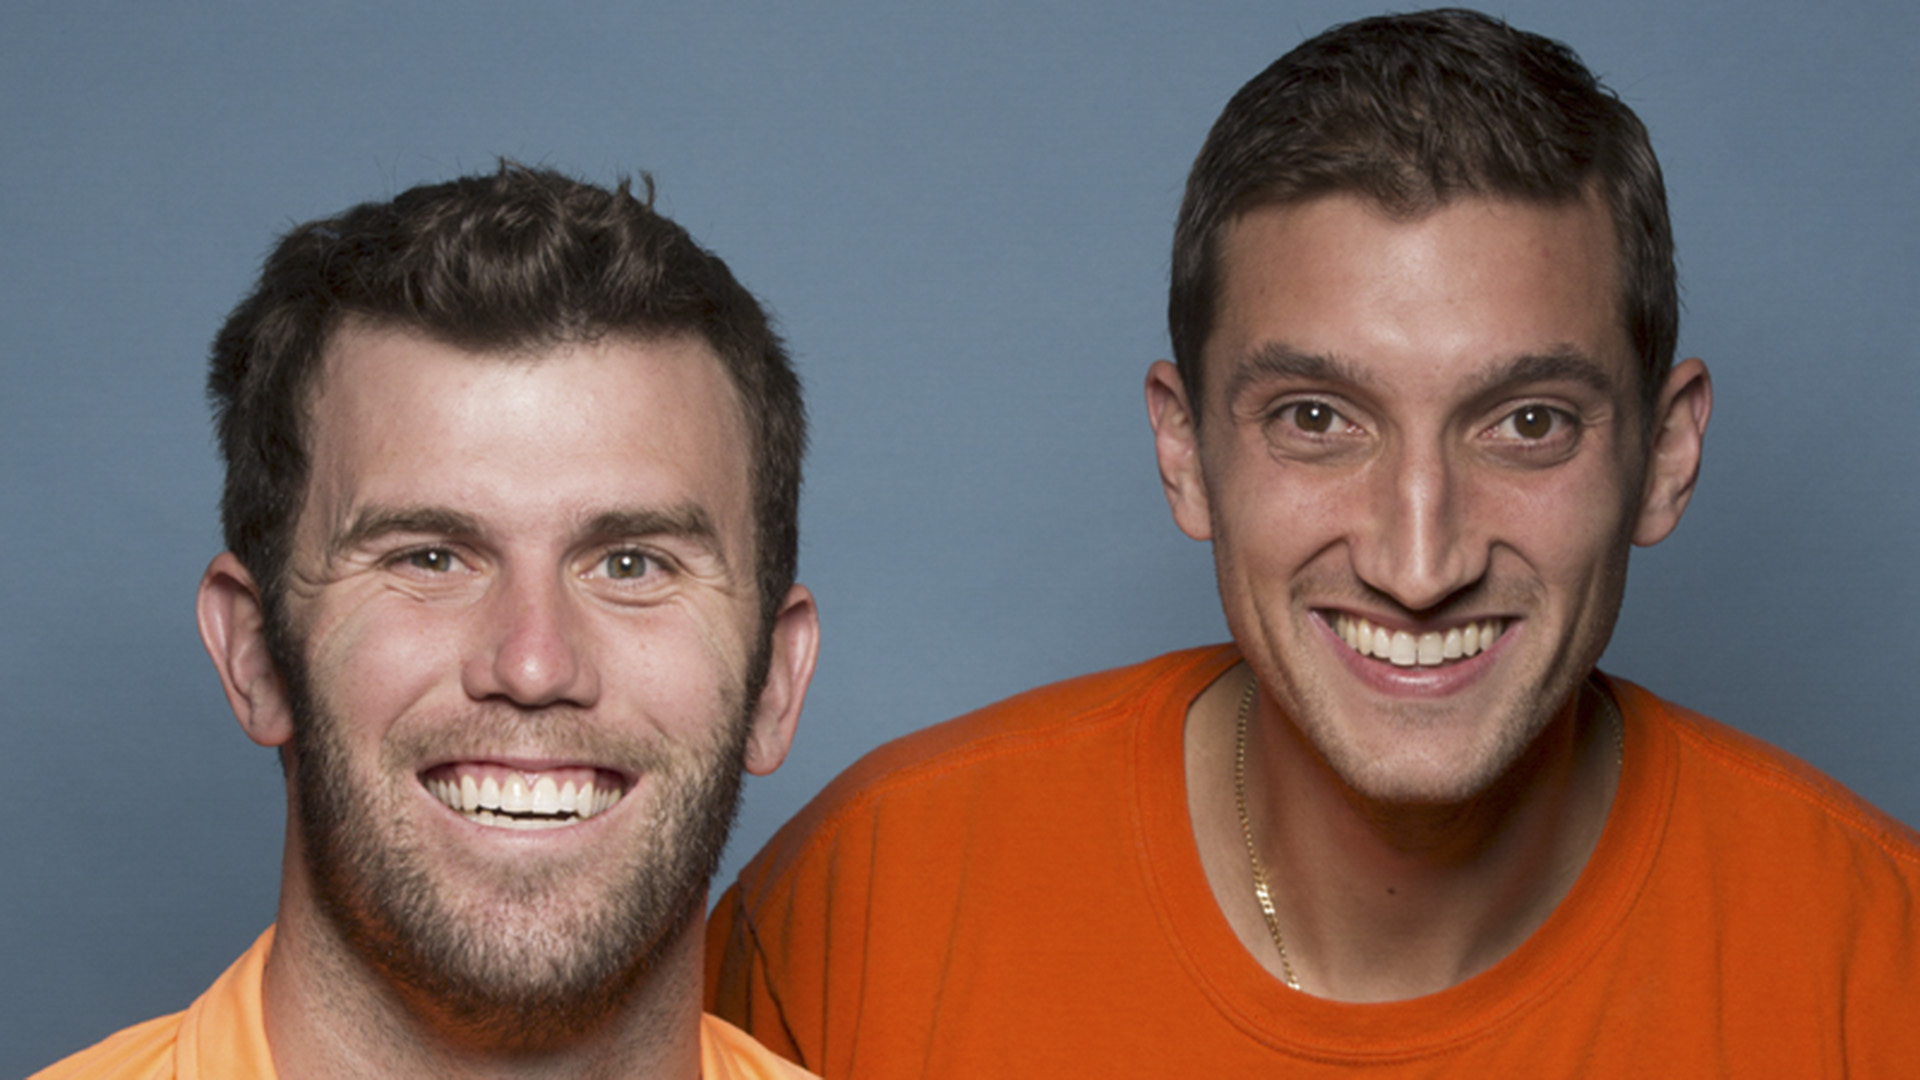 Brodie and Kurt were the sixth team eliminated on Season 28 of The Amazing Race.